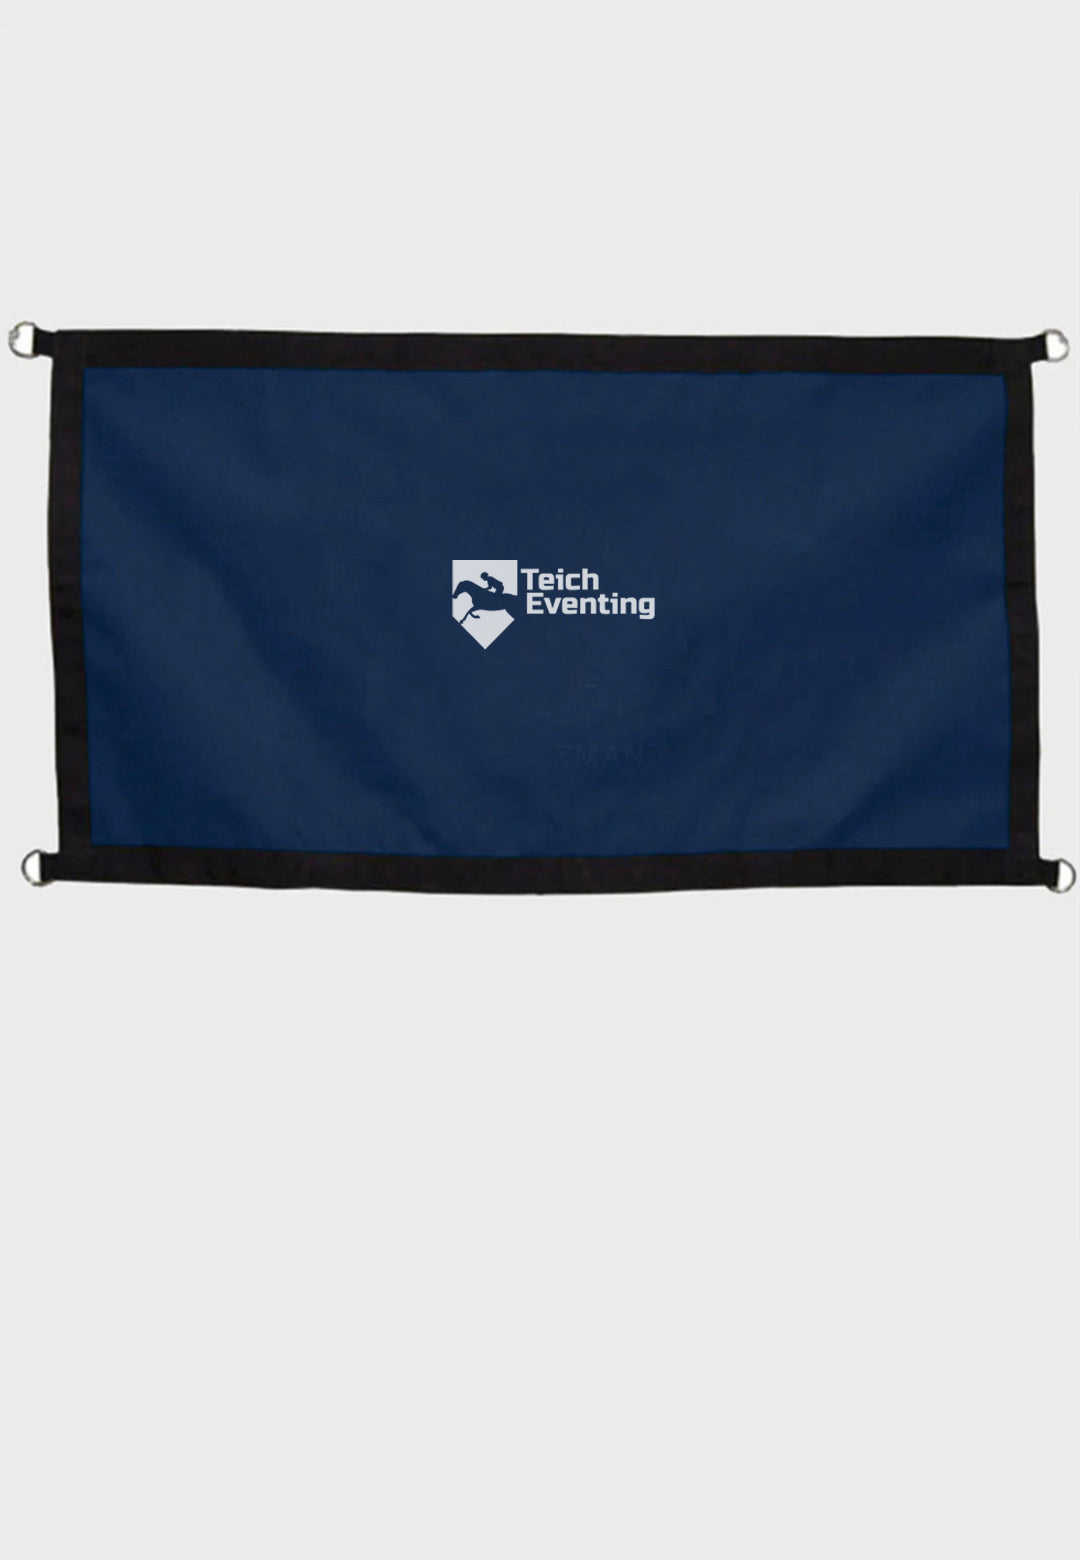 Teich Eventing World Class Equine Stall Guard